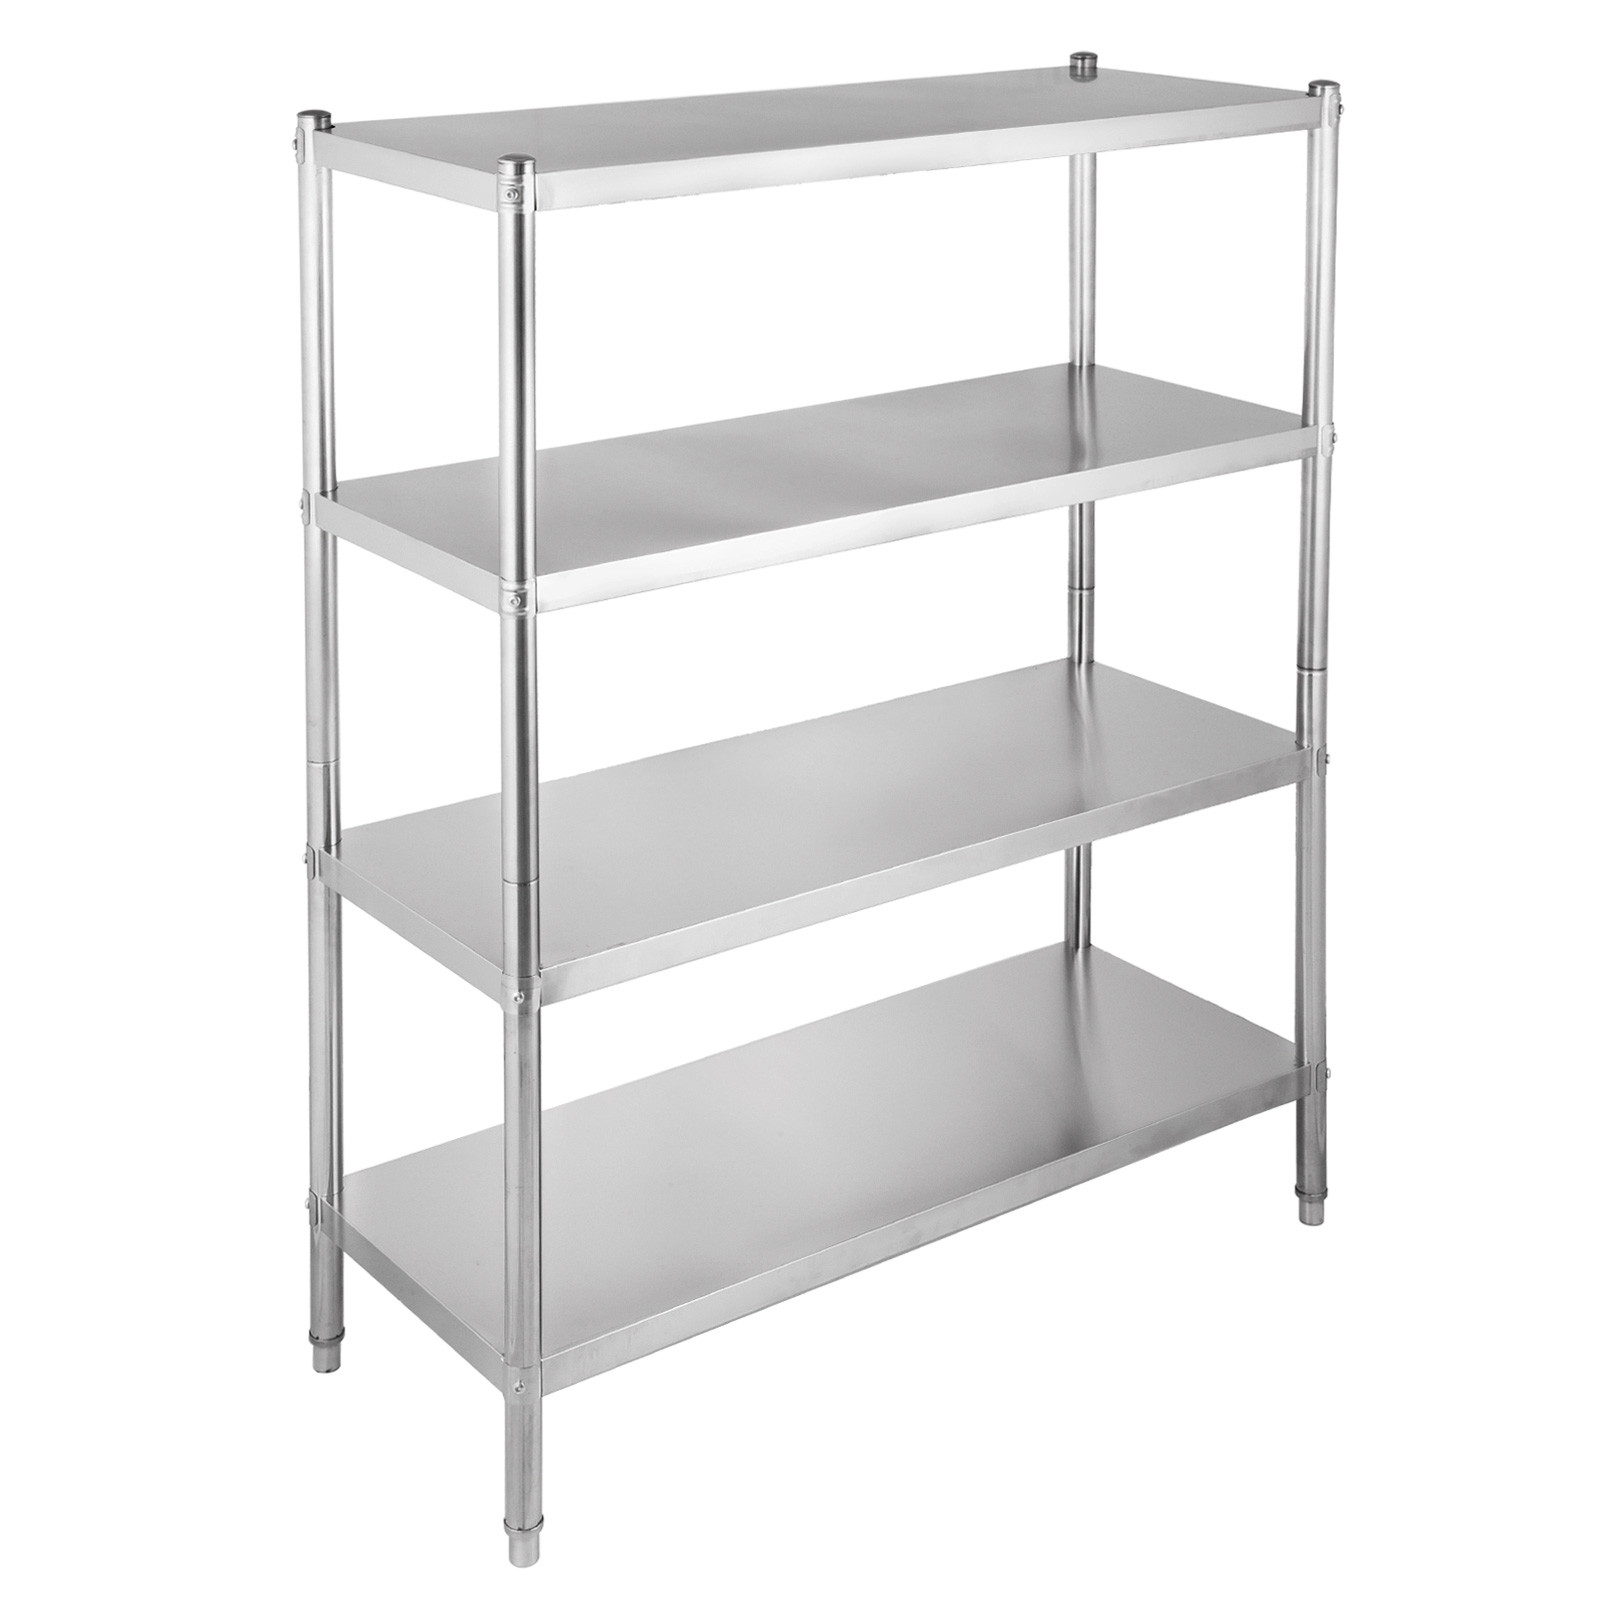 stainless steel shelving unit